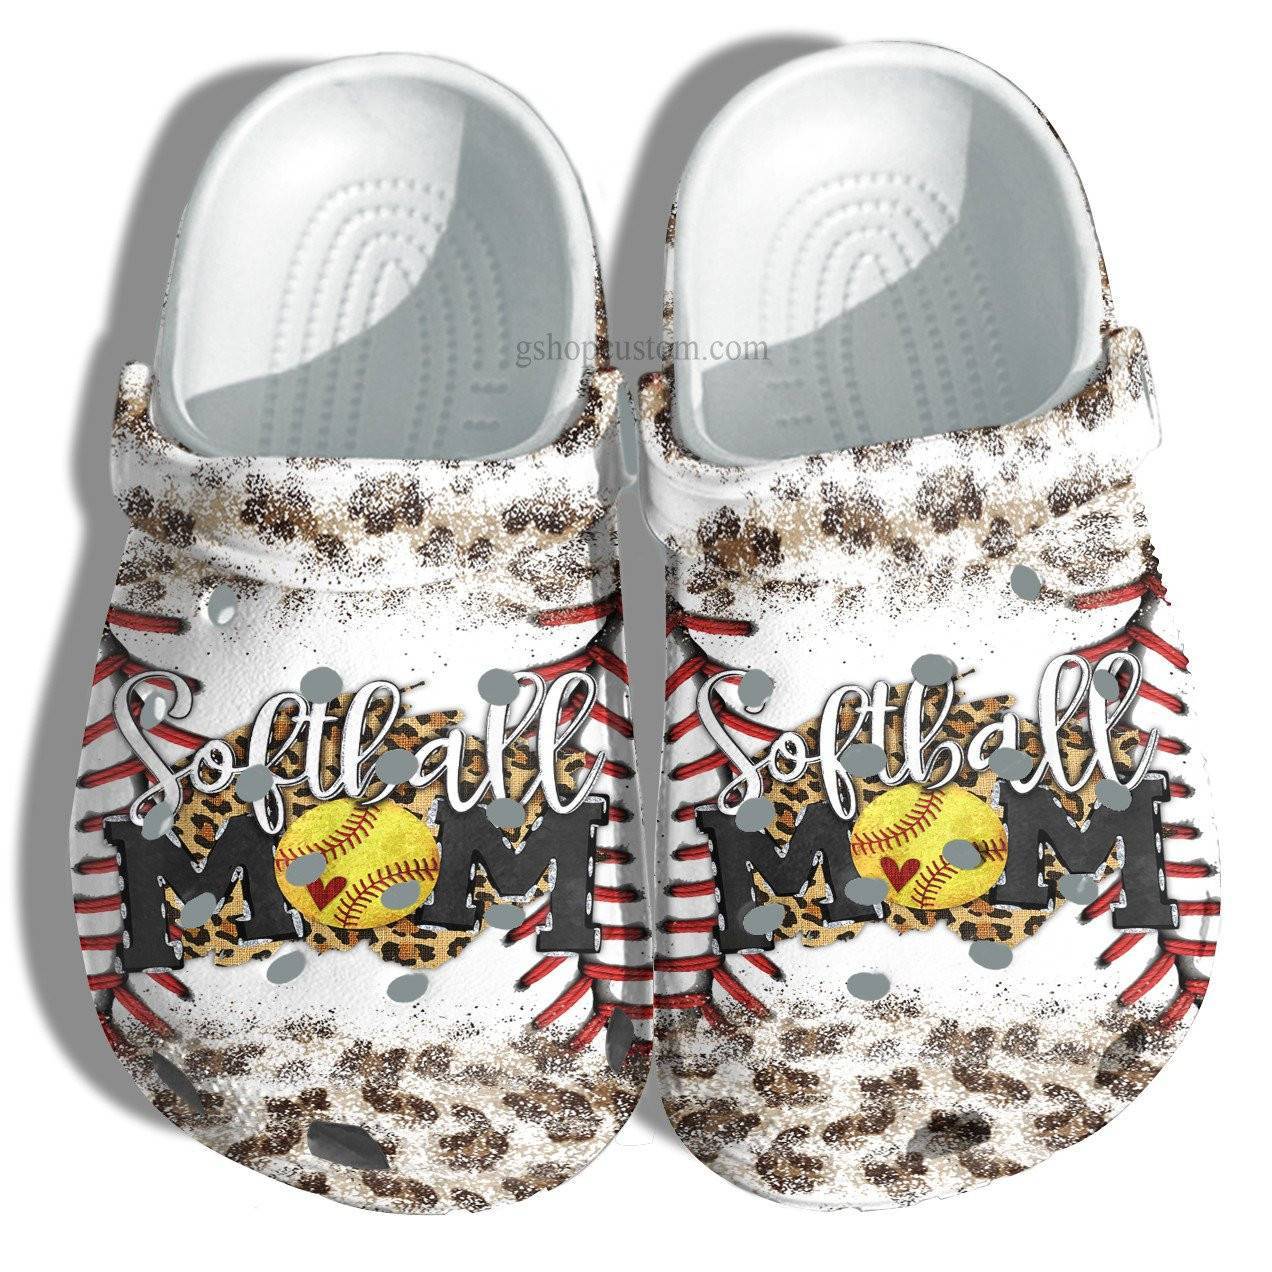 Softball Mom Leopard Skin Crocss Shoes For Girl Mom Grandma – Baseball Softball Mom Shoes Croc Clogs